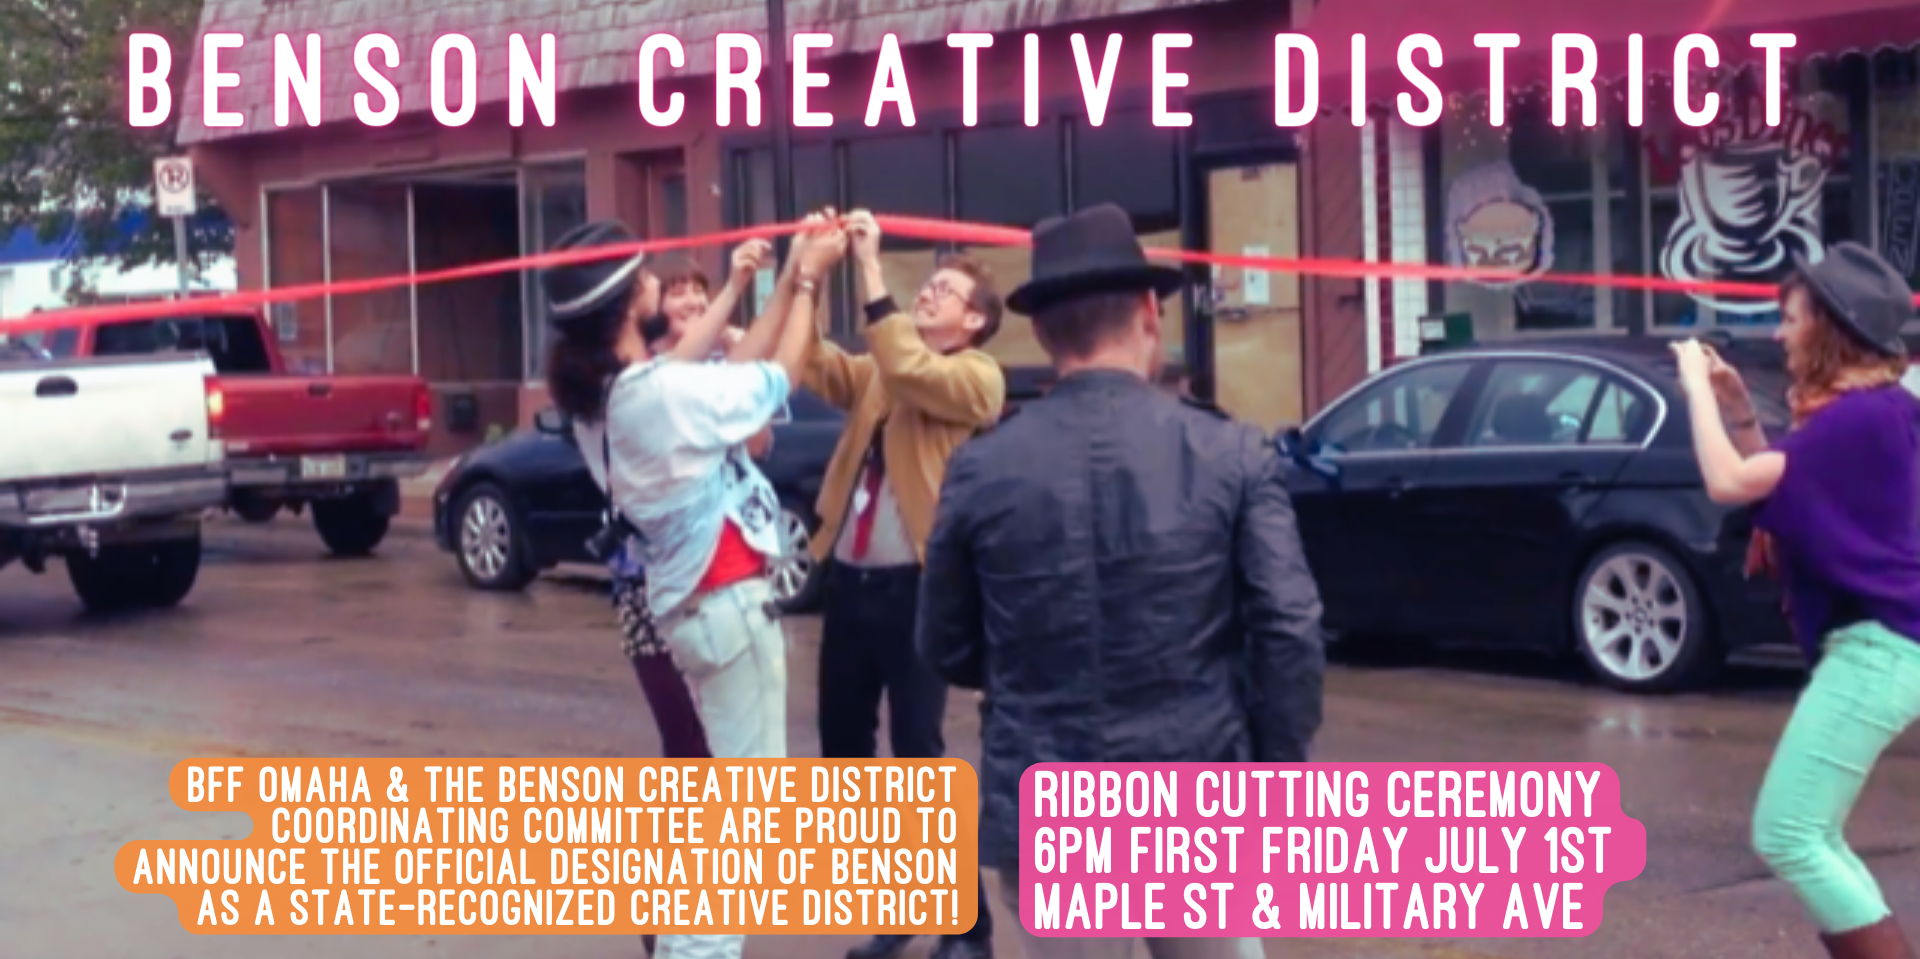 Benson Creative District | Ribbon Cutting Ceremony promotional image